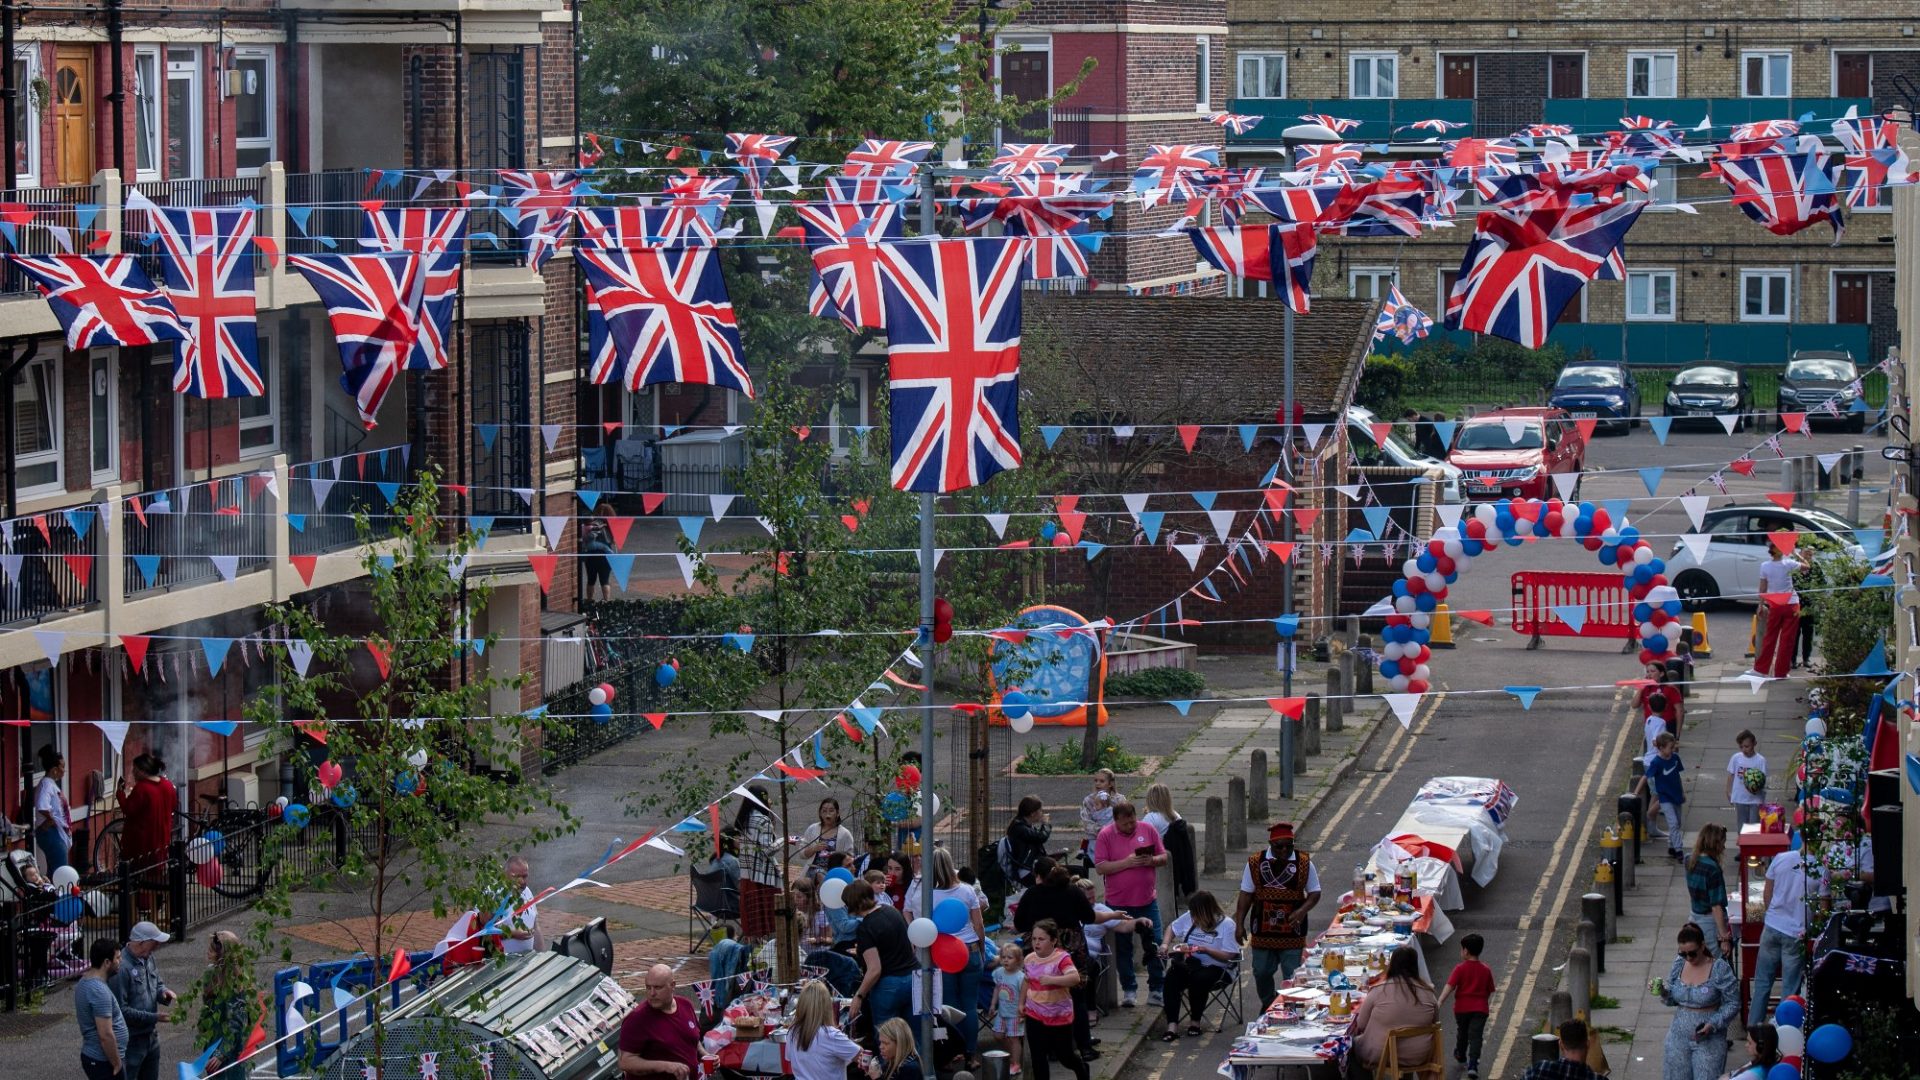 Residents of the Kirby Estate in Bermondsey have a Coronation street party on May 7, 2023. Photo: Chris J Ratcliffe/Getty